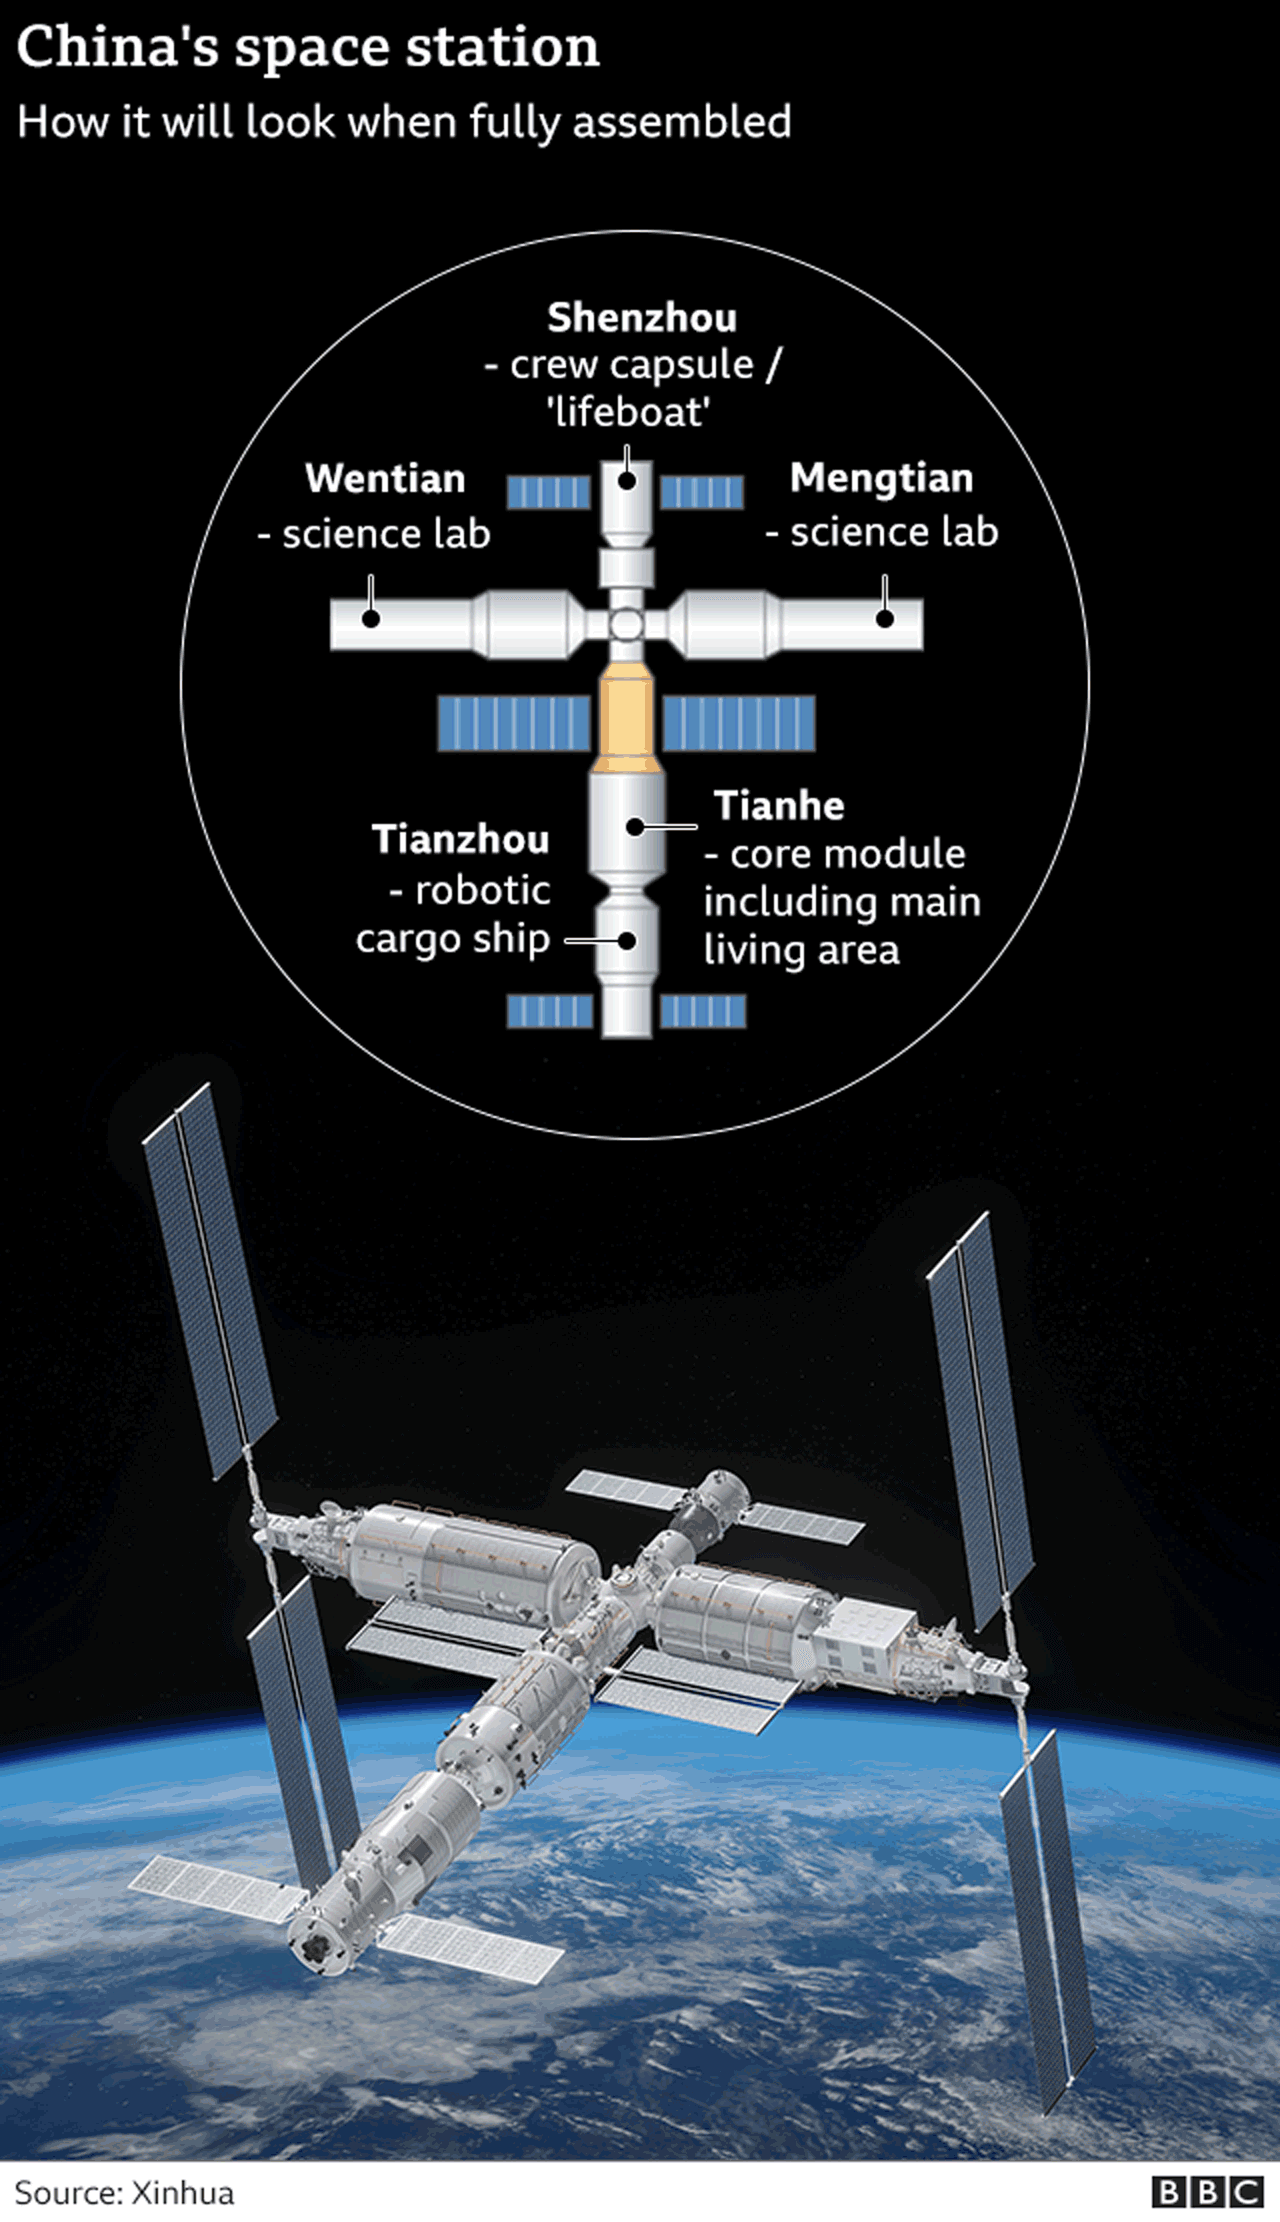 Graphic showing key elements of China's space station